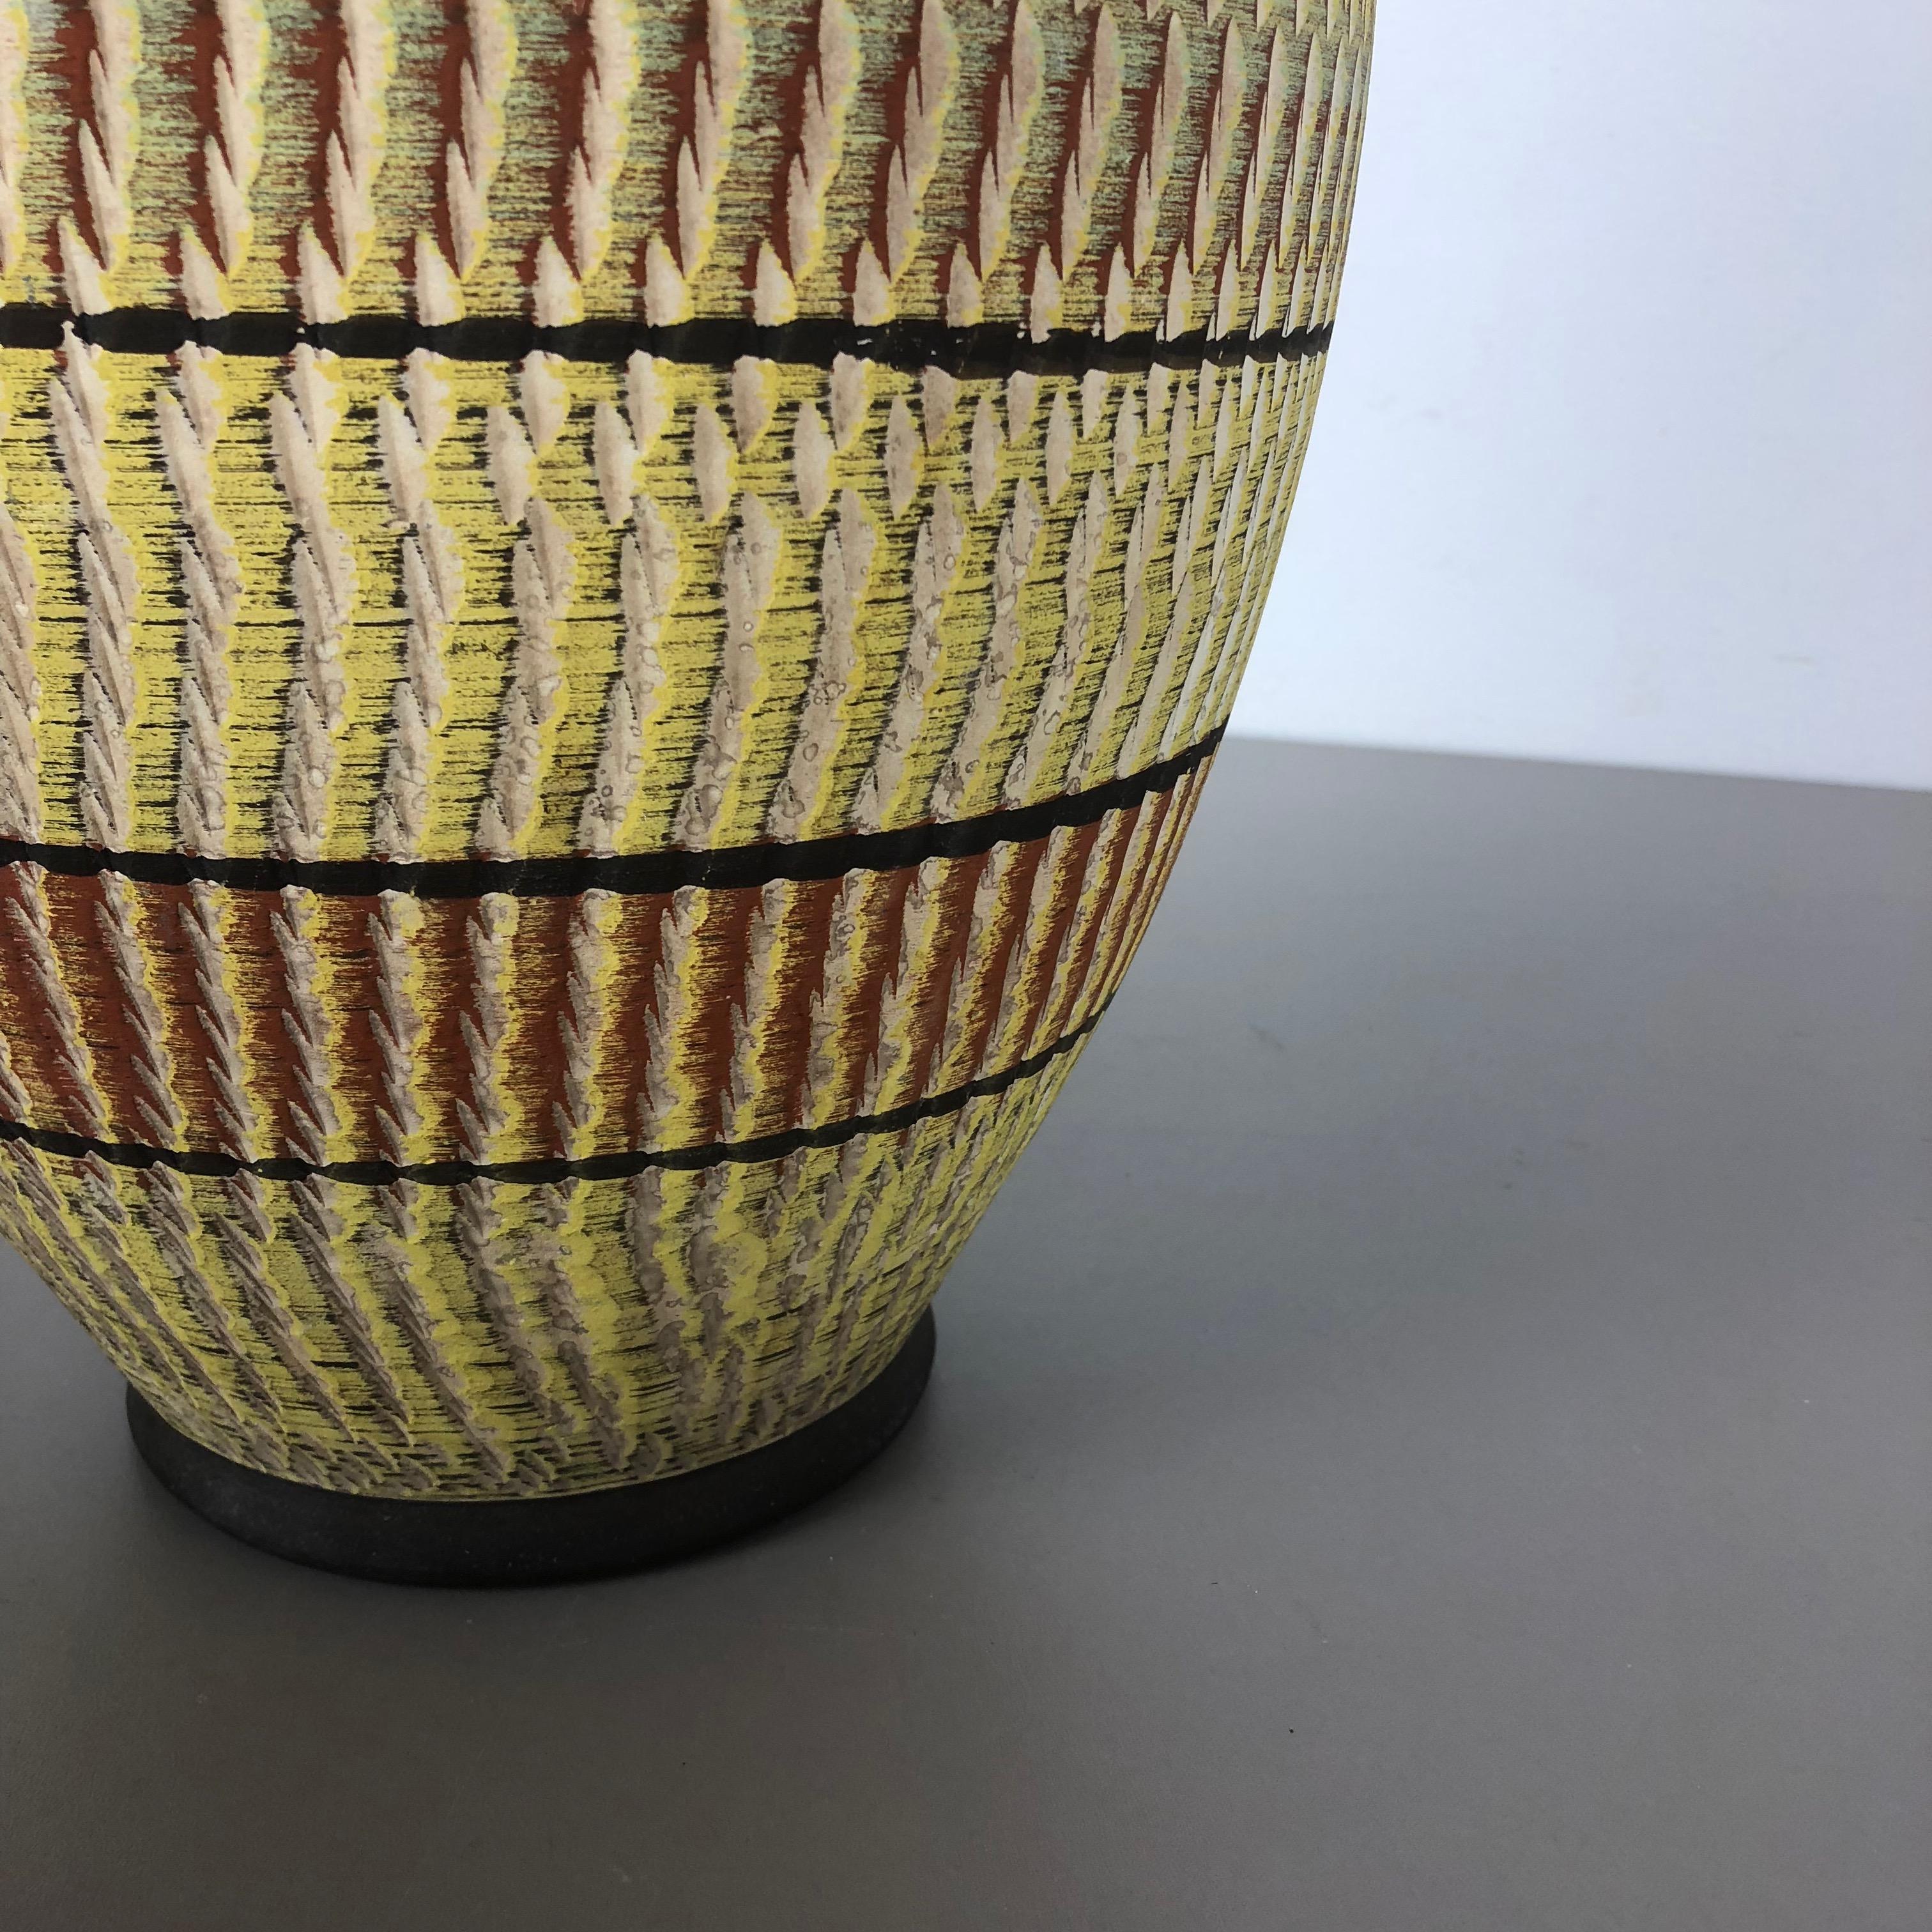 Large abstract Ceramic Pottery Floor Vase by Zöller and Born, Germany, 1950s For Sale 2